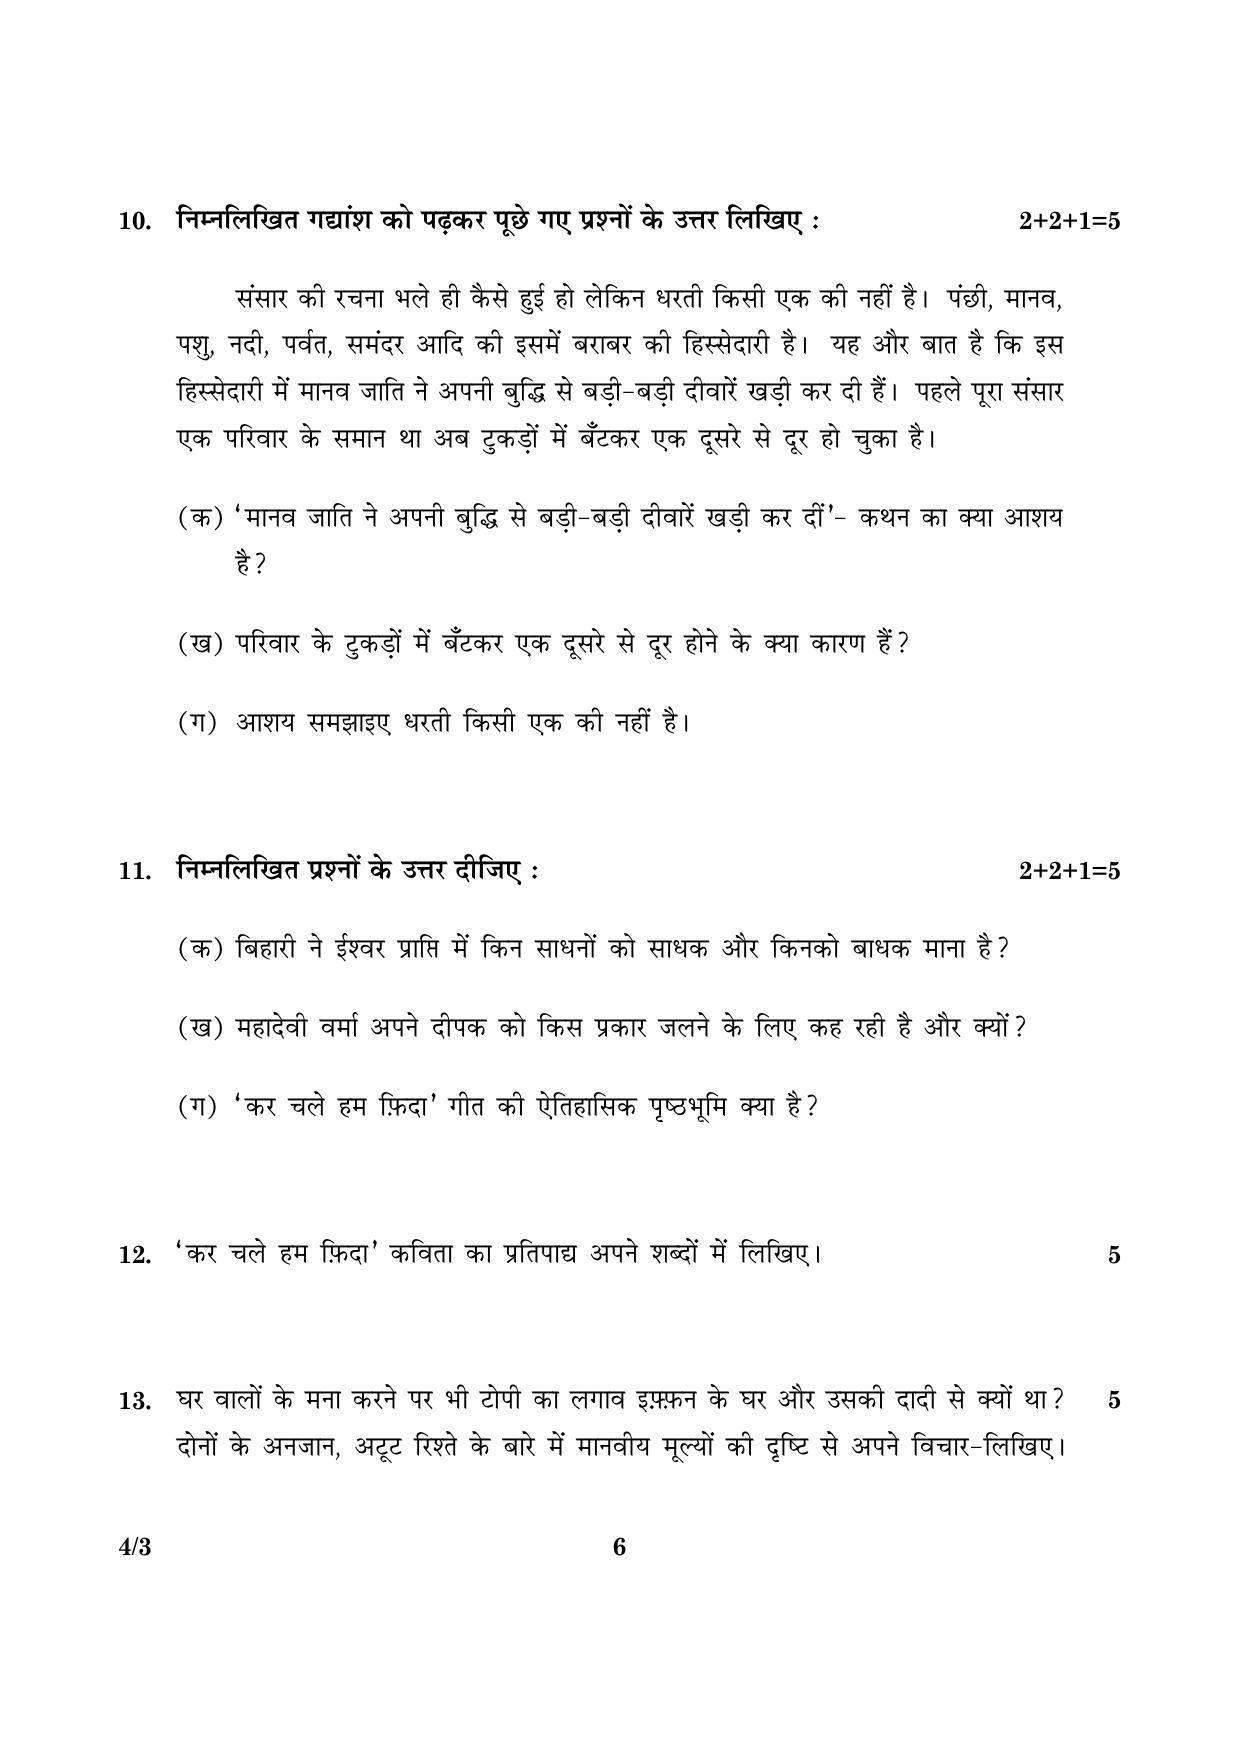 CBSE Class 10 004 Set 3 Hindi Course B 2016 Question Paper - Page 6